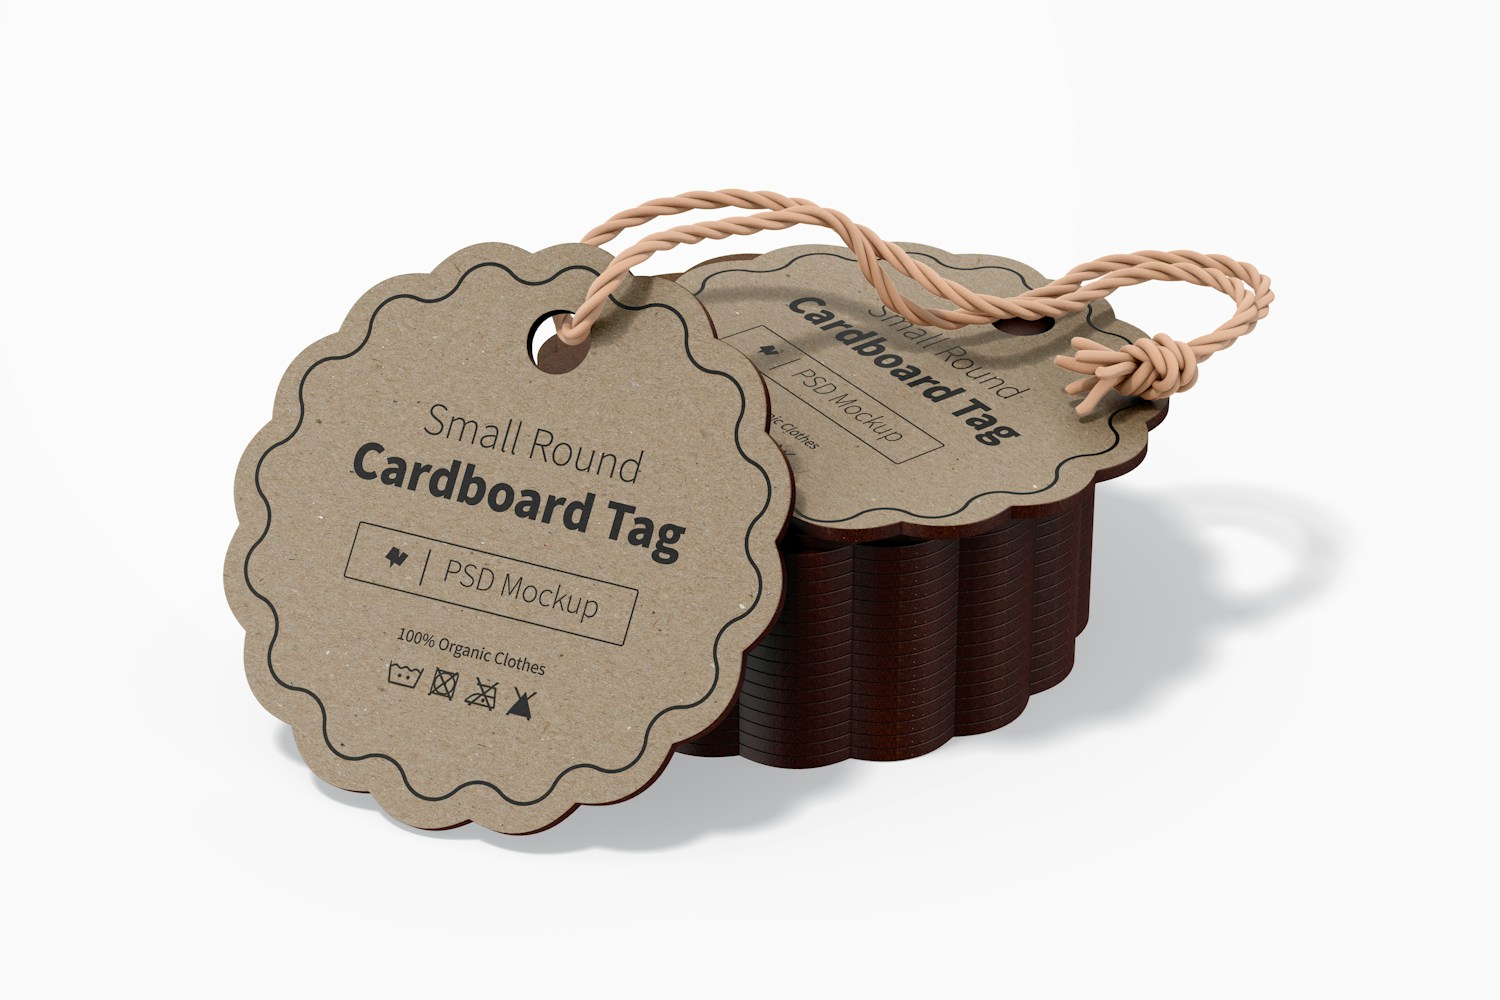 Small Round Cardboard Tags Mockup, Stacked